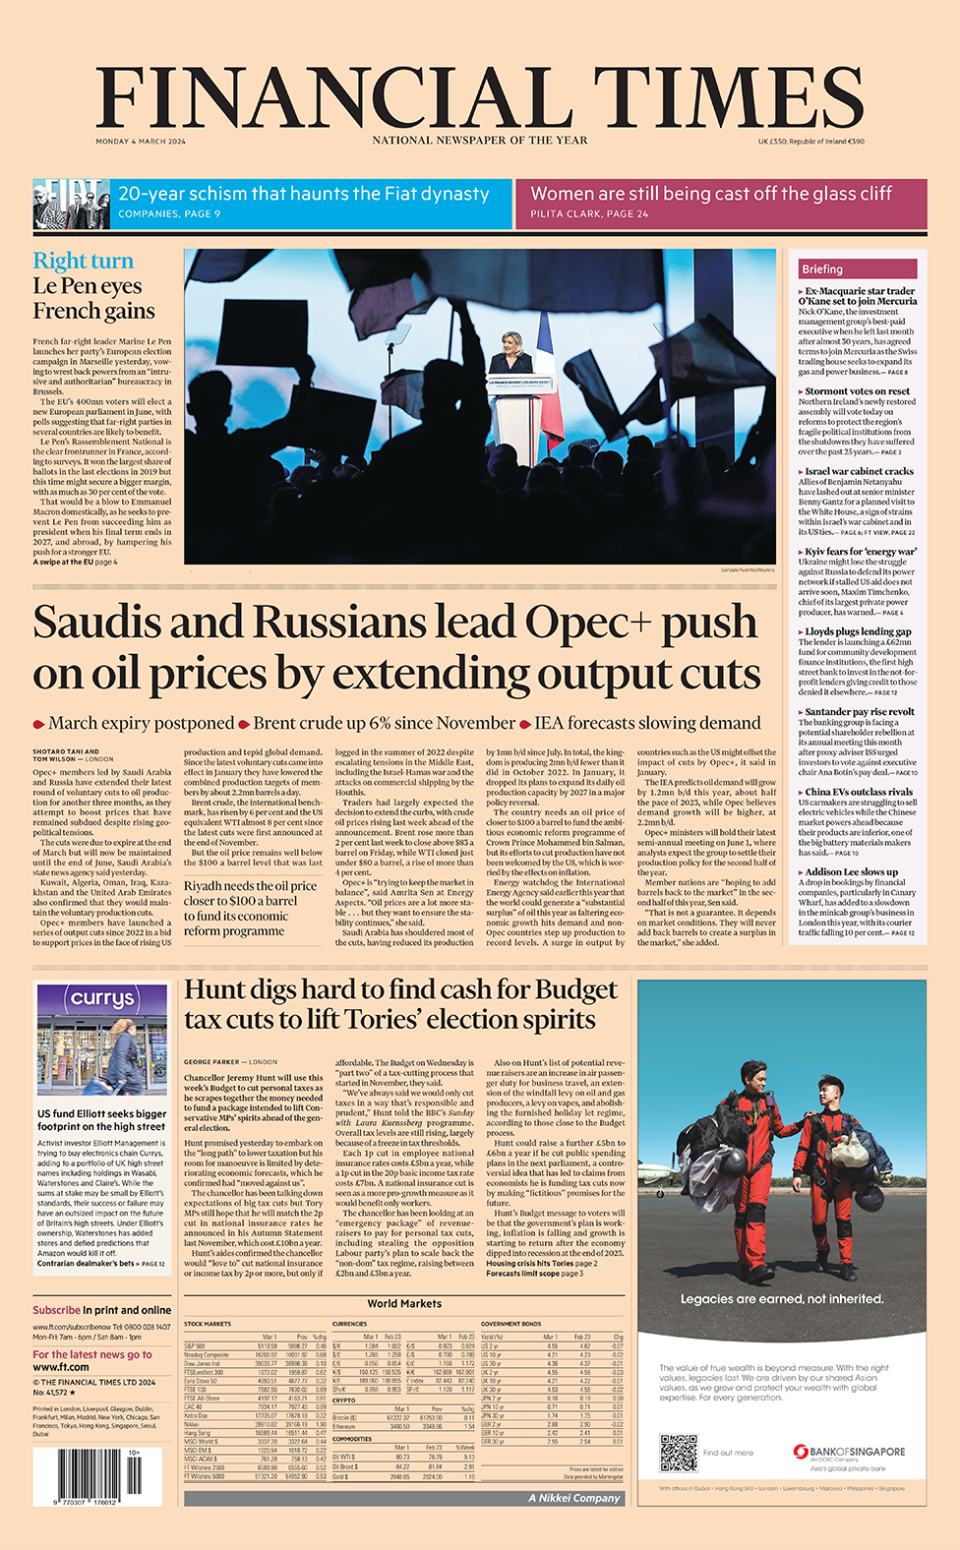 The headline in the Financial Times reads: "Saudis and Russians lead Opec+ push on oil prices by extending output cuts".